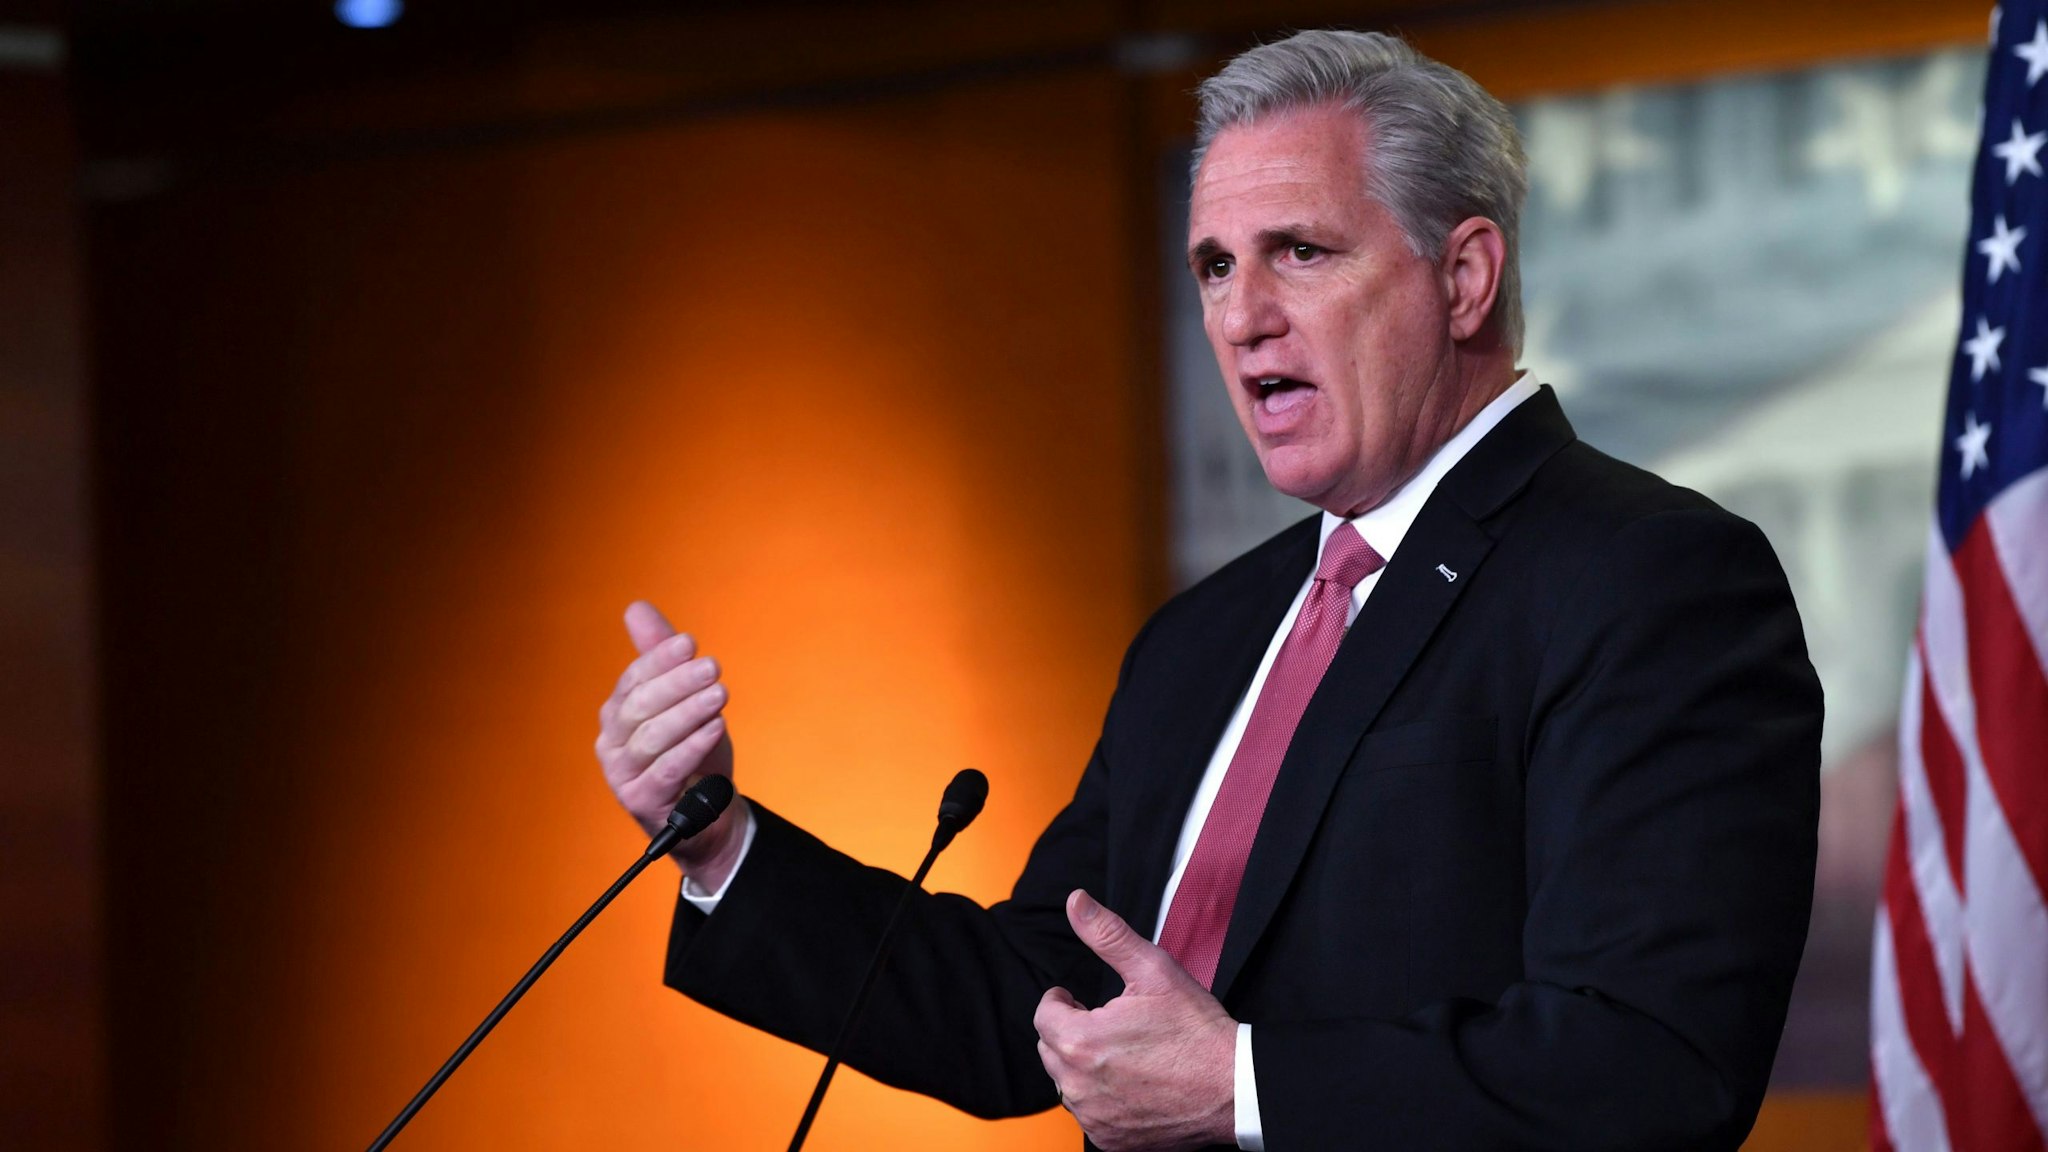 US House Minority Leader, Kevin McCarthy, Republican of California, speaks during his weekly press briefing on Capitol Hill in Washington, DC, on January 21, 2021.